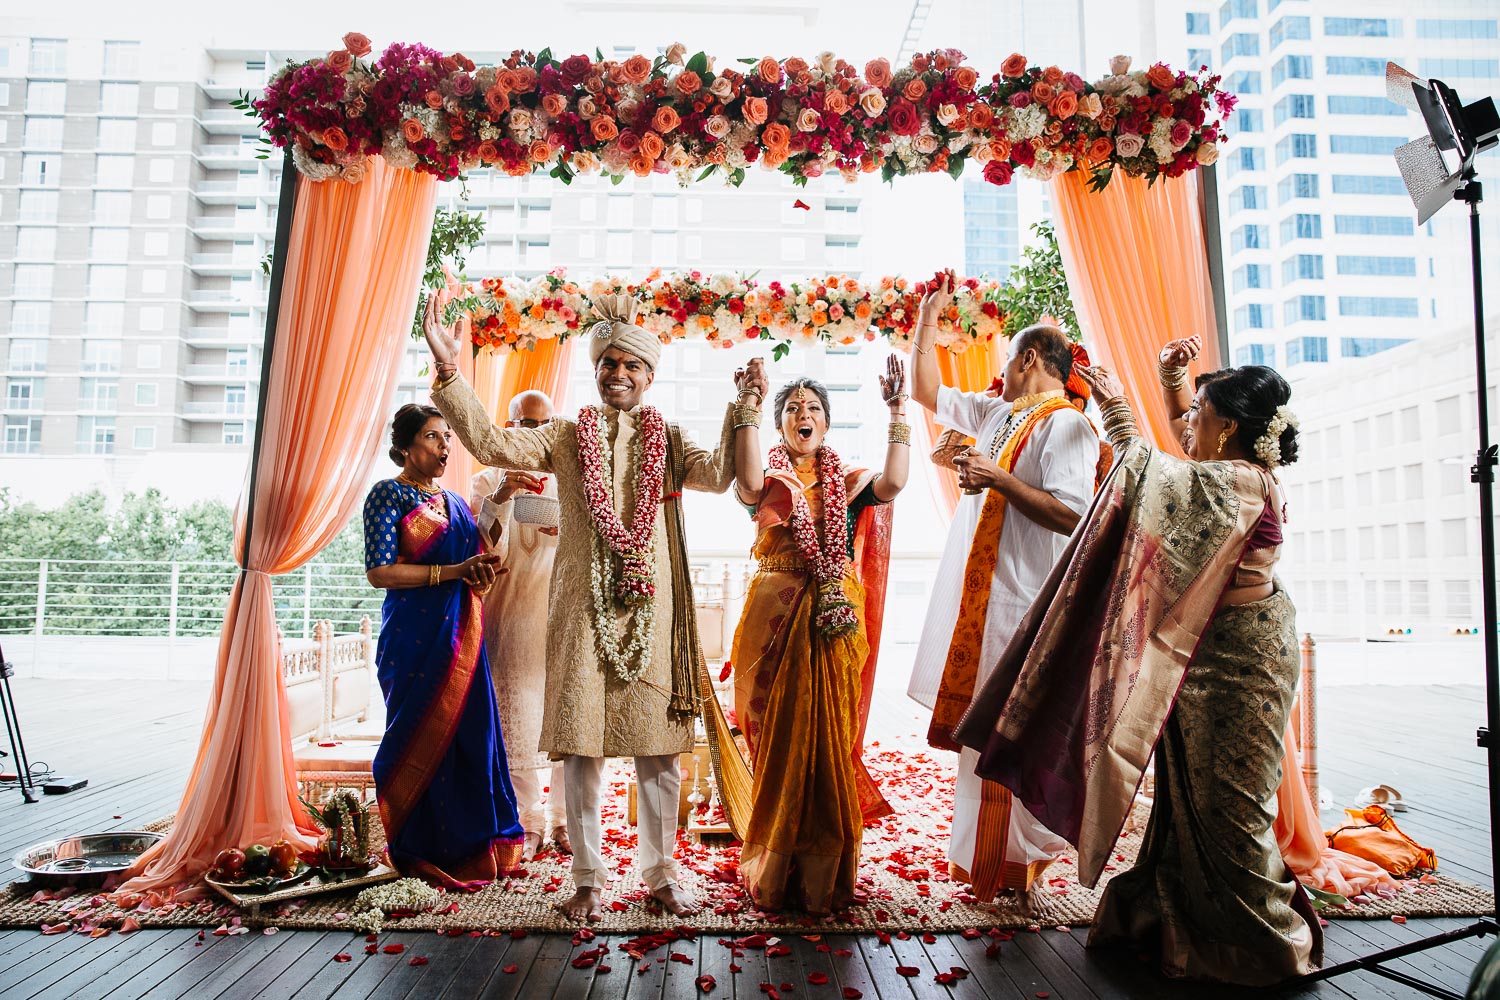 A wedded couple celebrate mandap temporarily erected for the purpose of a Hindu or Jain wedding